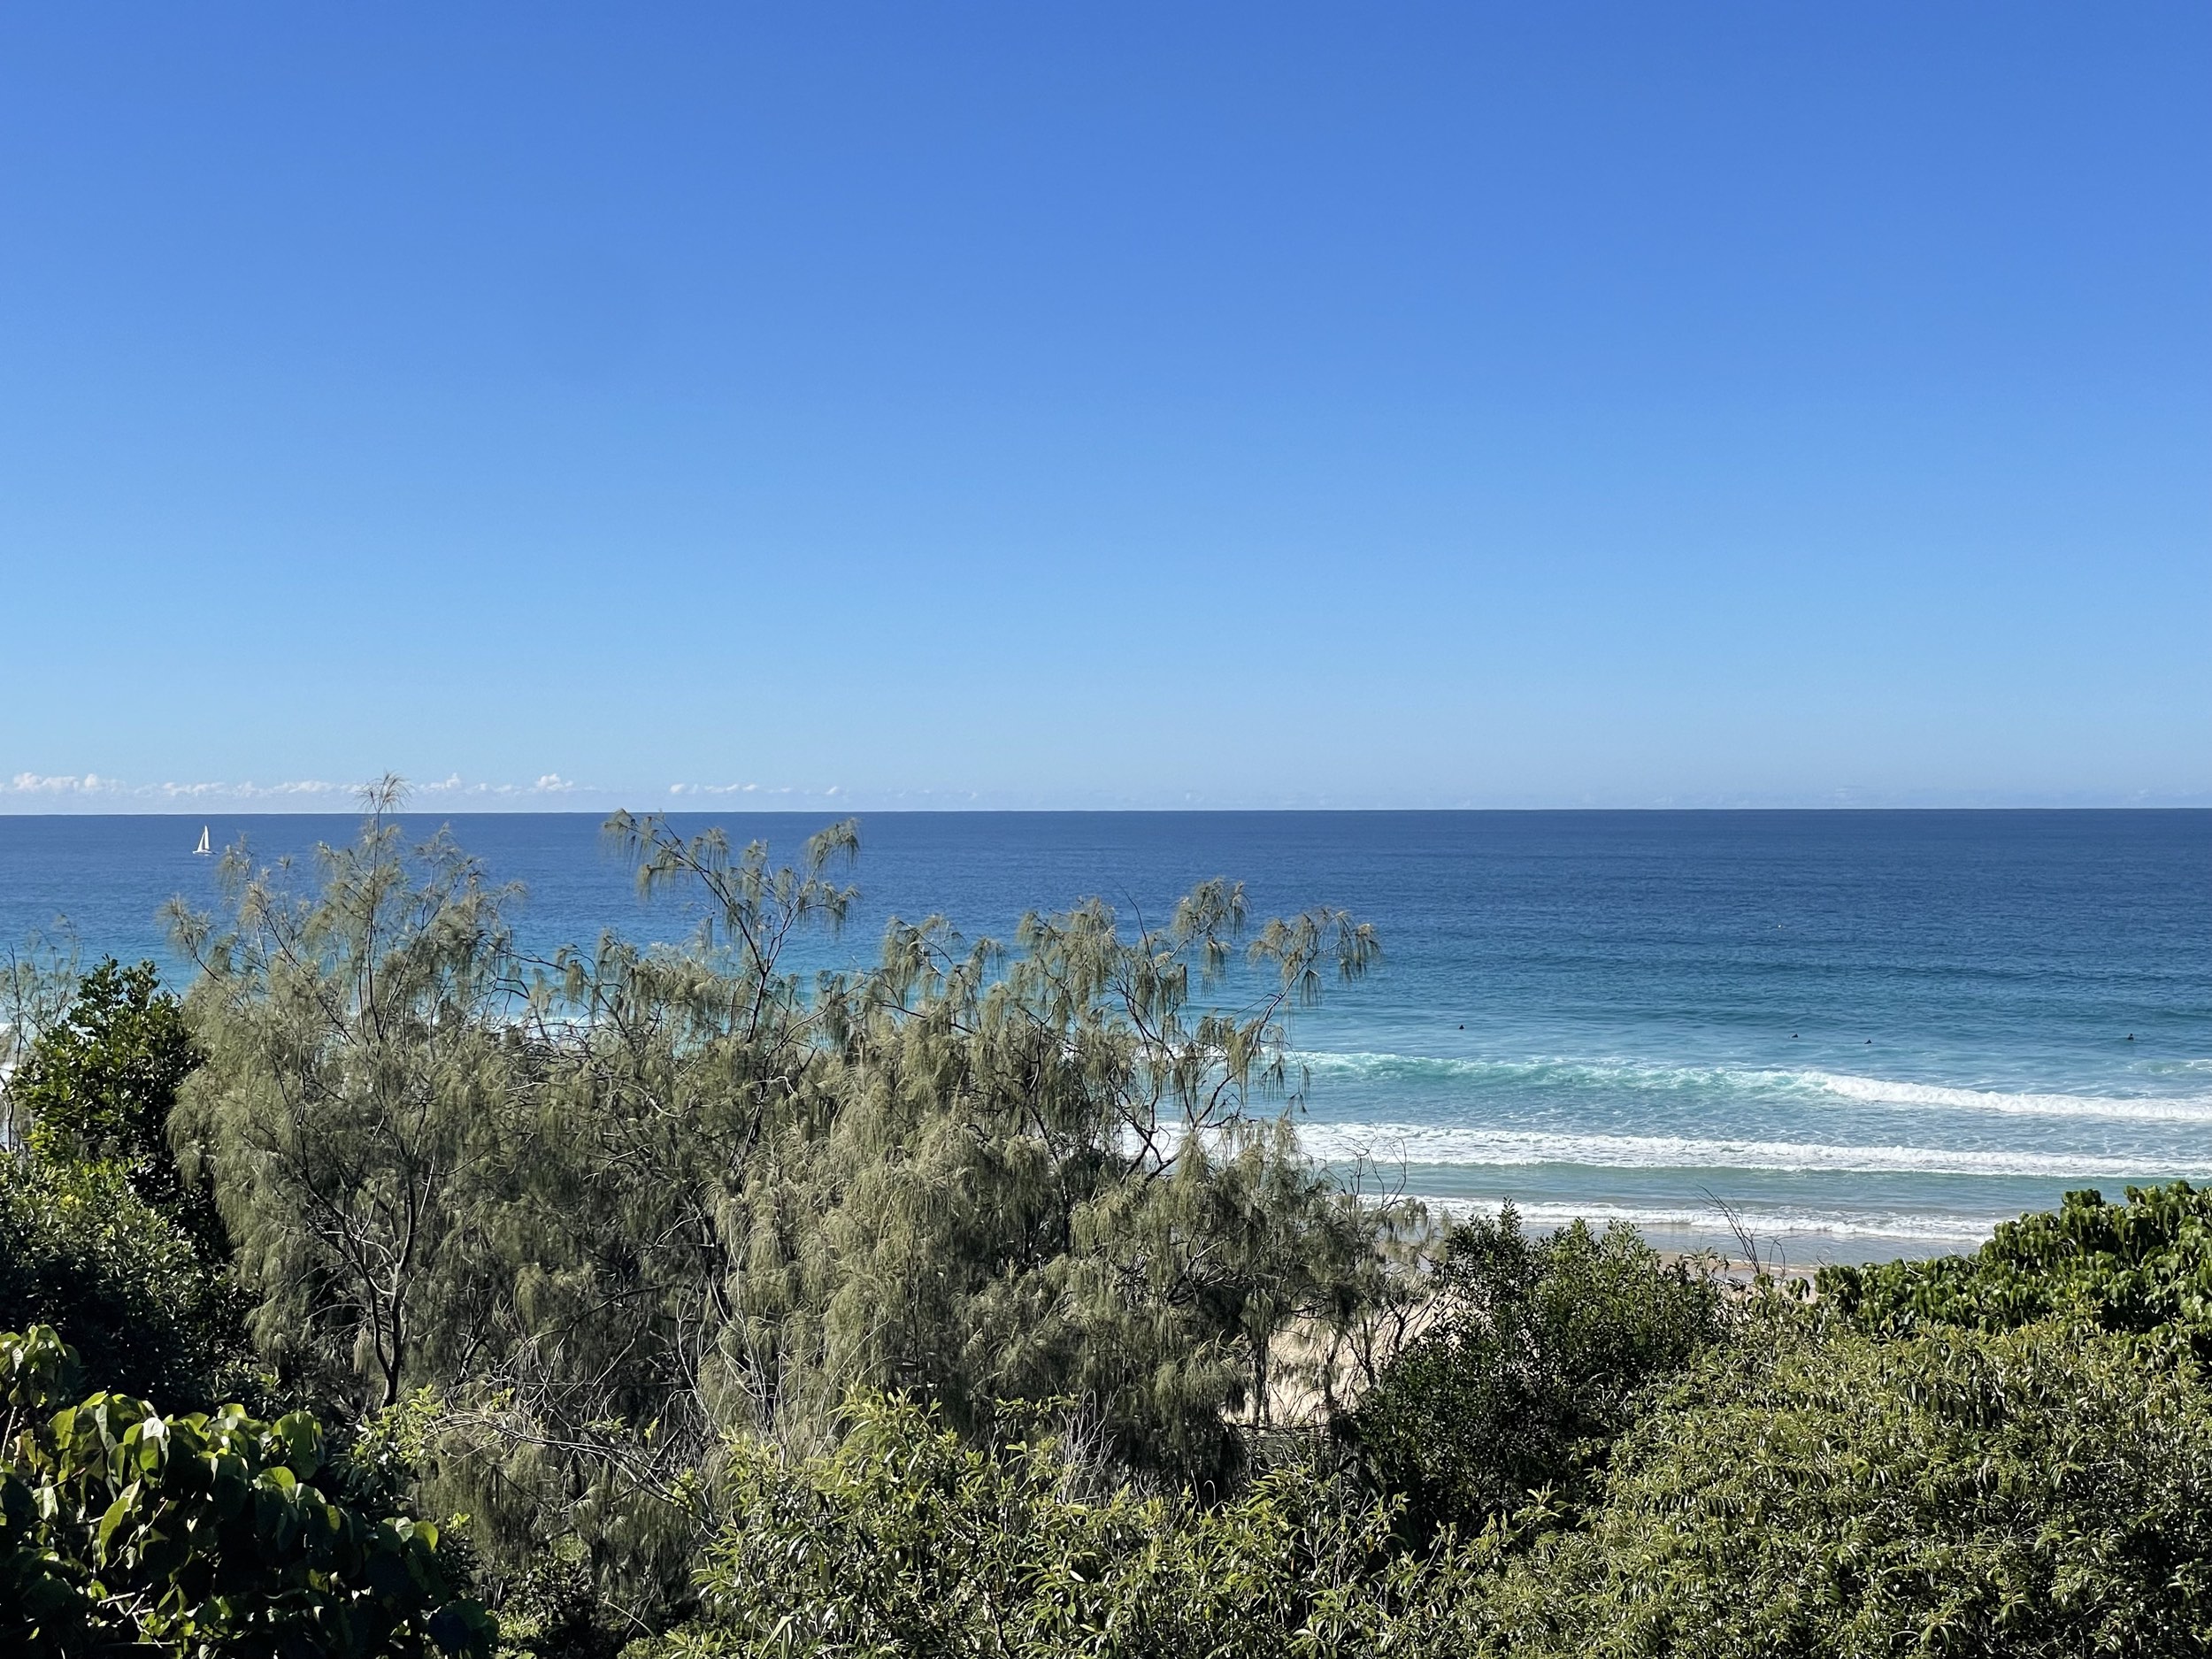 Sunrise Beach Noosa from view point